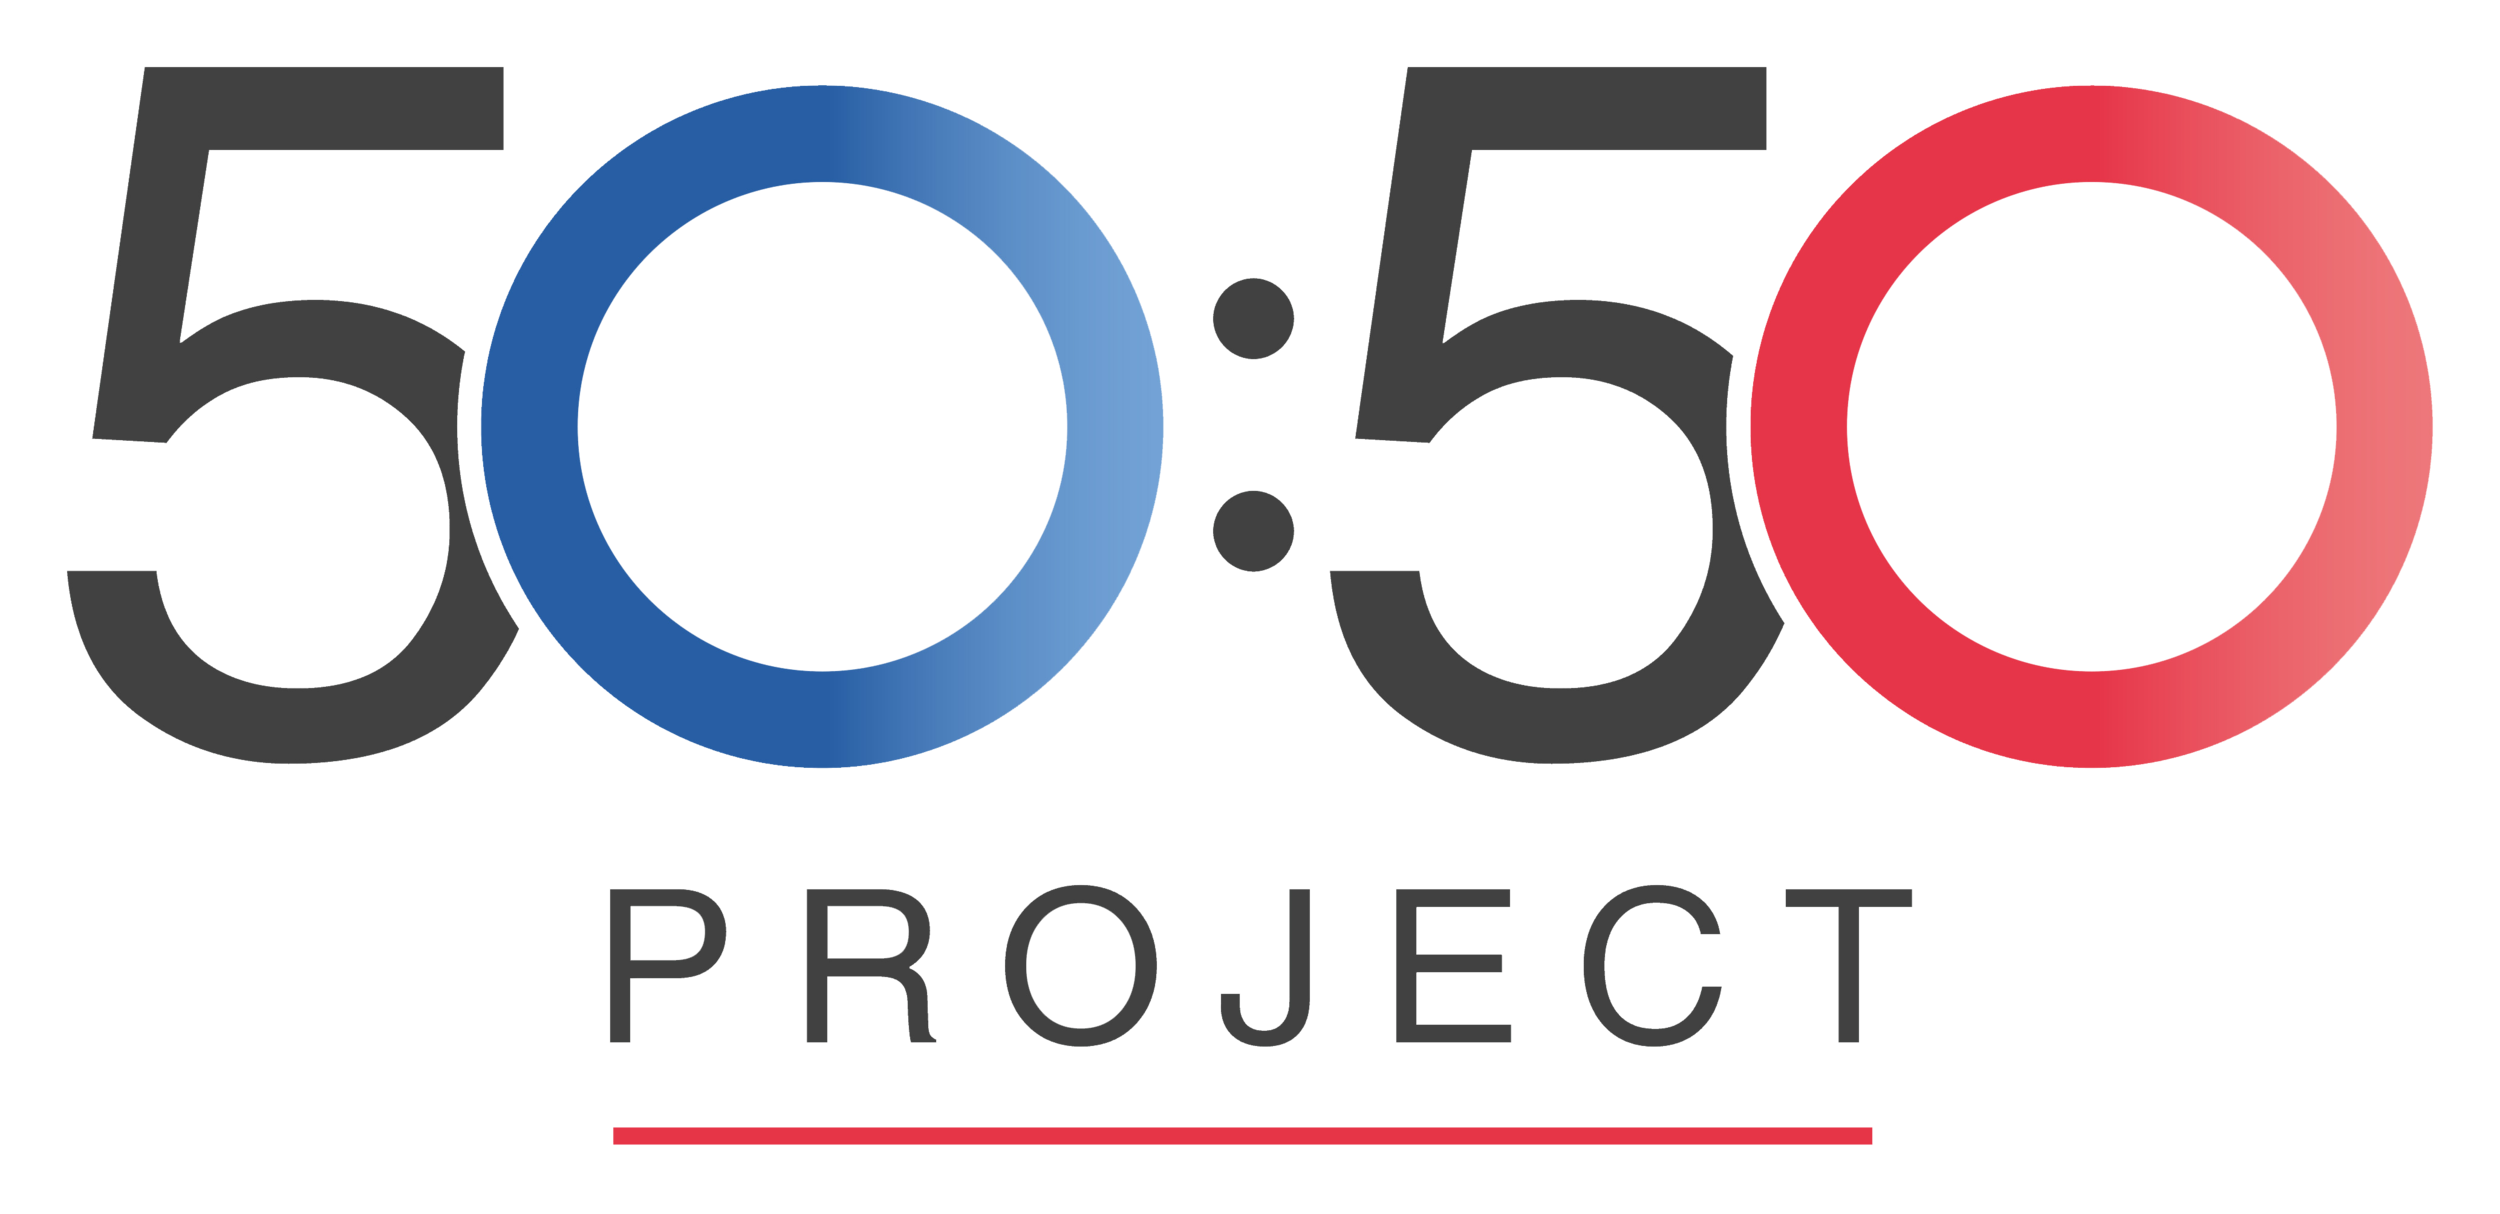 5050Project General.PNG